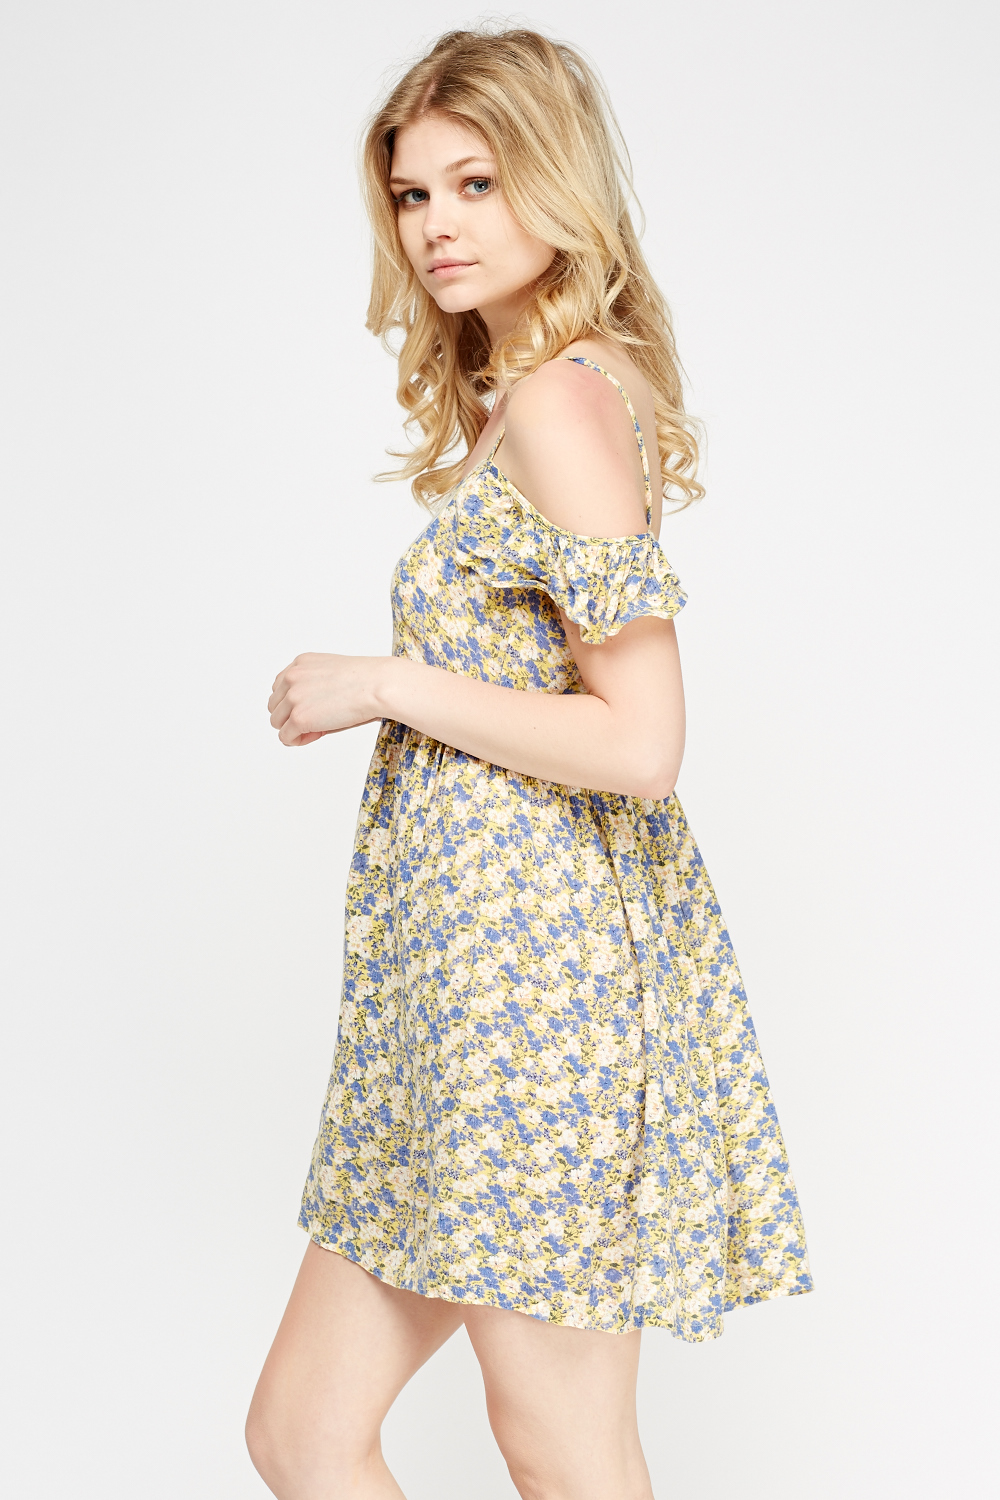 Cold Shoulder Yellow Printed Dress - Just $7